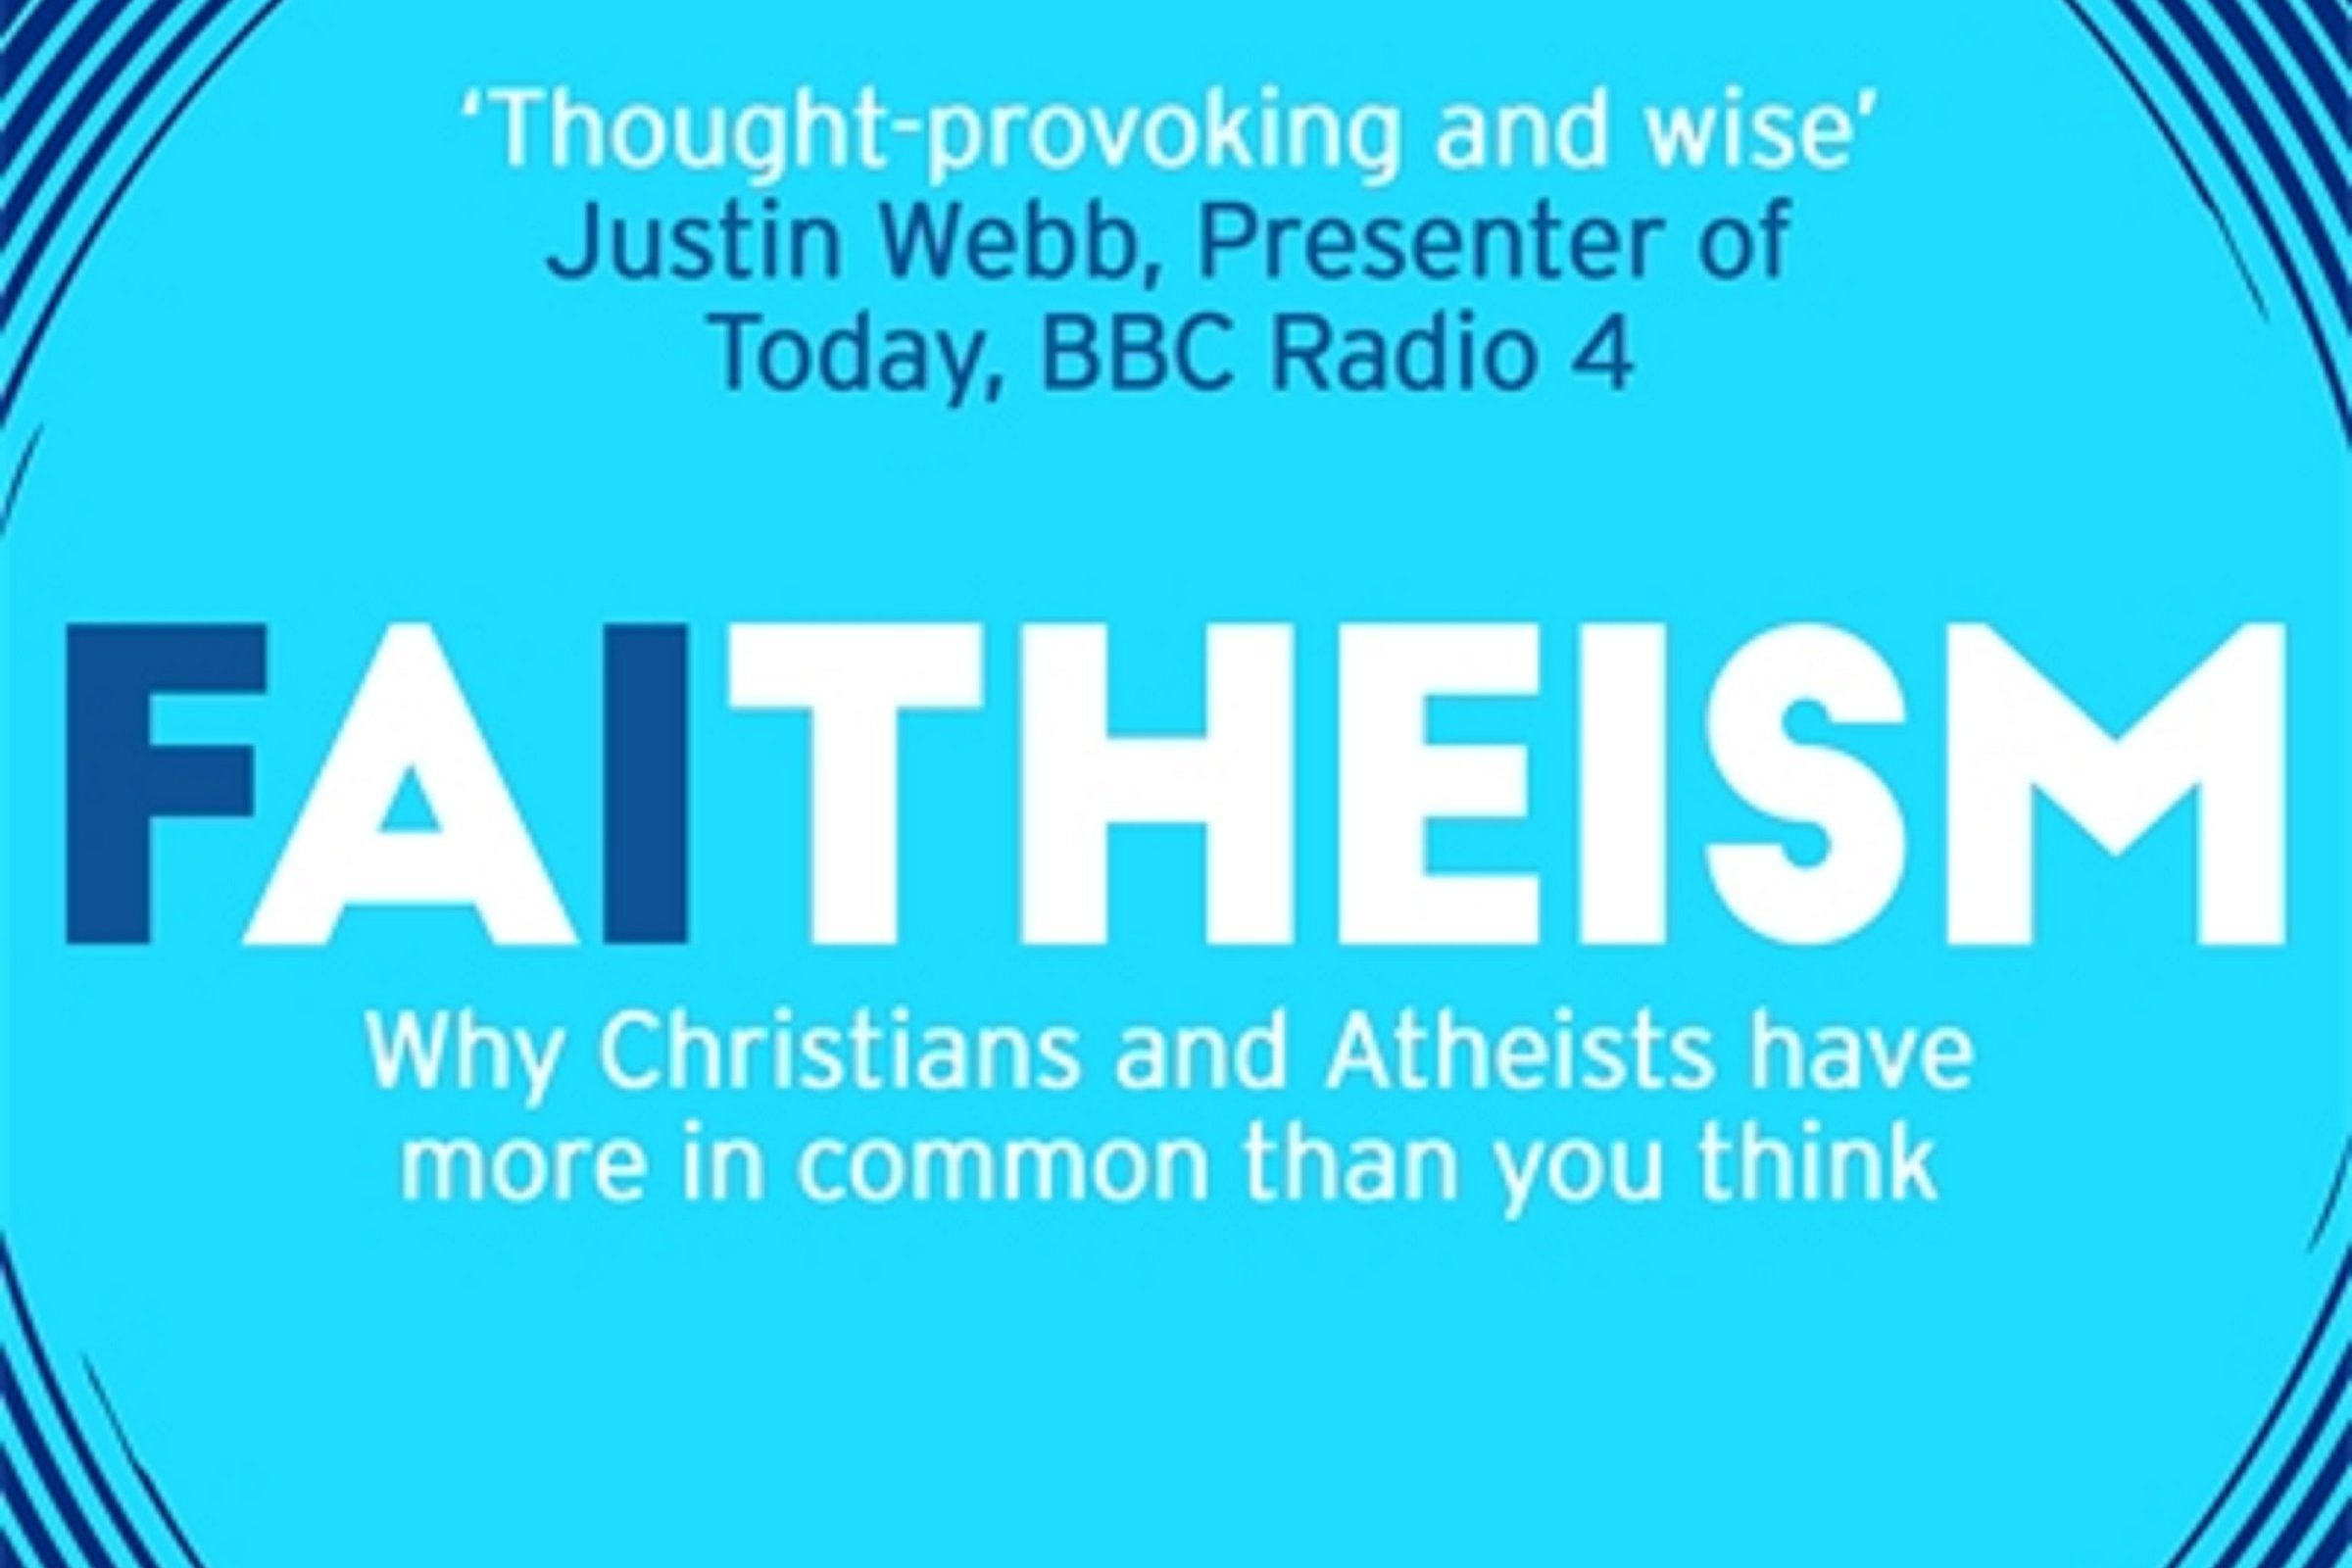 Faitheism: Why Christians and atheists have more in common than you think, by Krish Kandiah